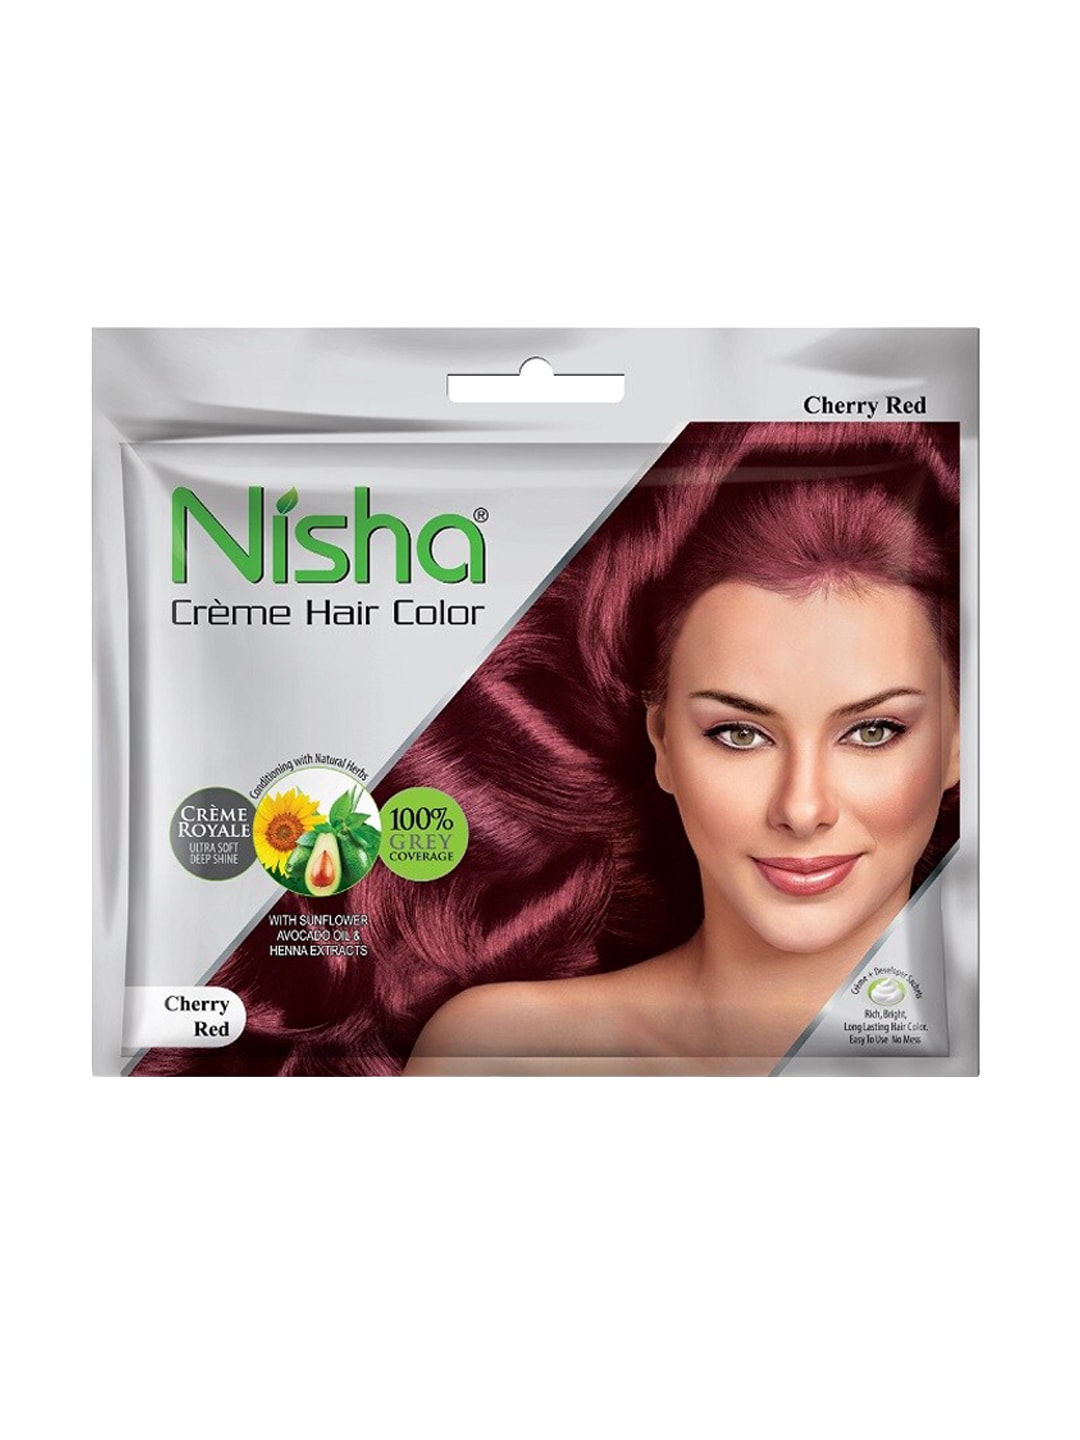 Nisha Unisex Red Pack of 6 Creme Hair Color-Cherry Red Price in India